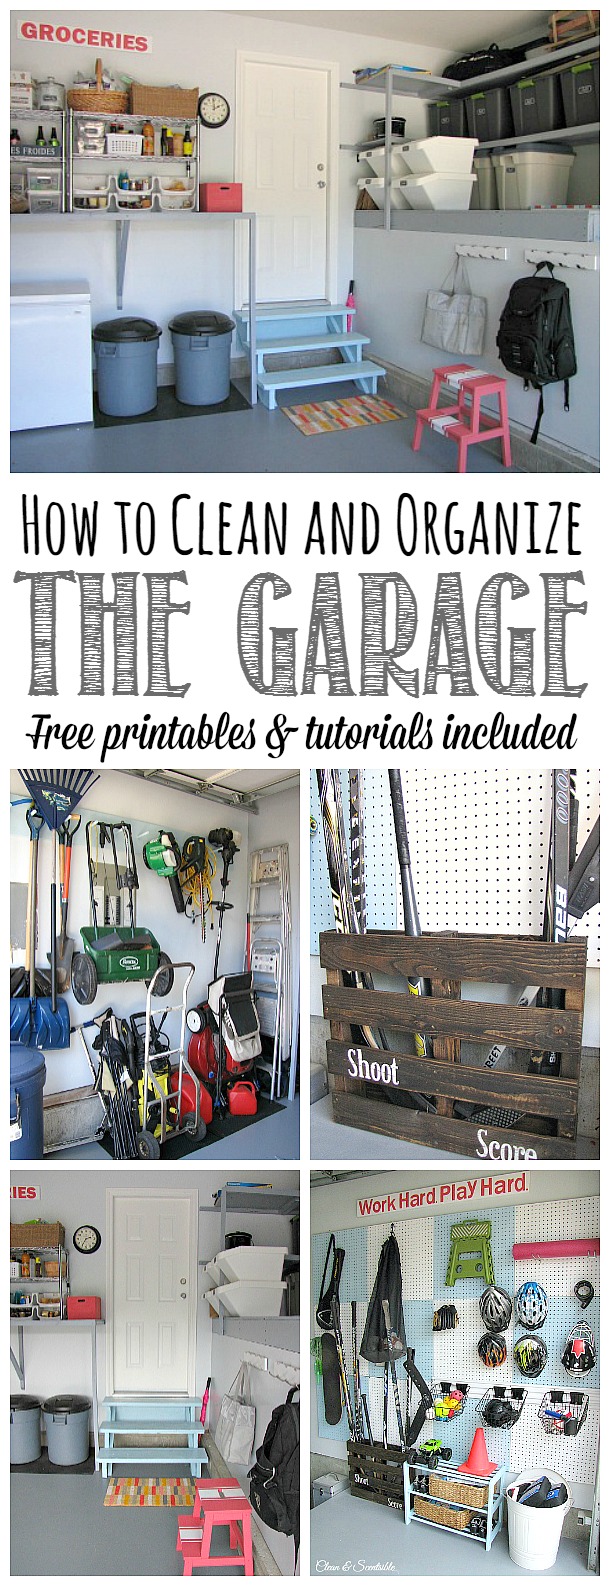 Everything you need to get your garage cleaned and organized!  Tons of great ideas and tutorials as well as free printables to keep you on track.  Part of The Household Organization Diet.